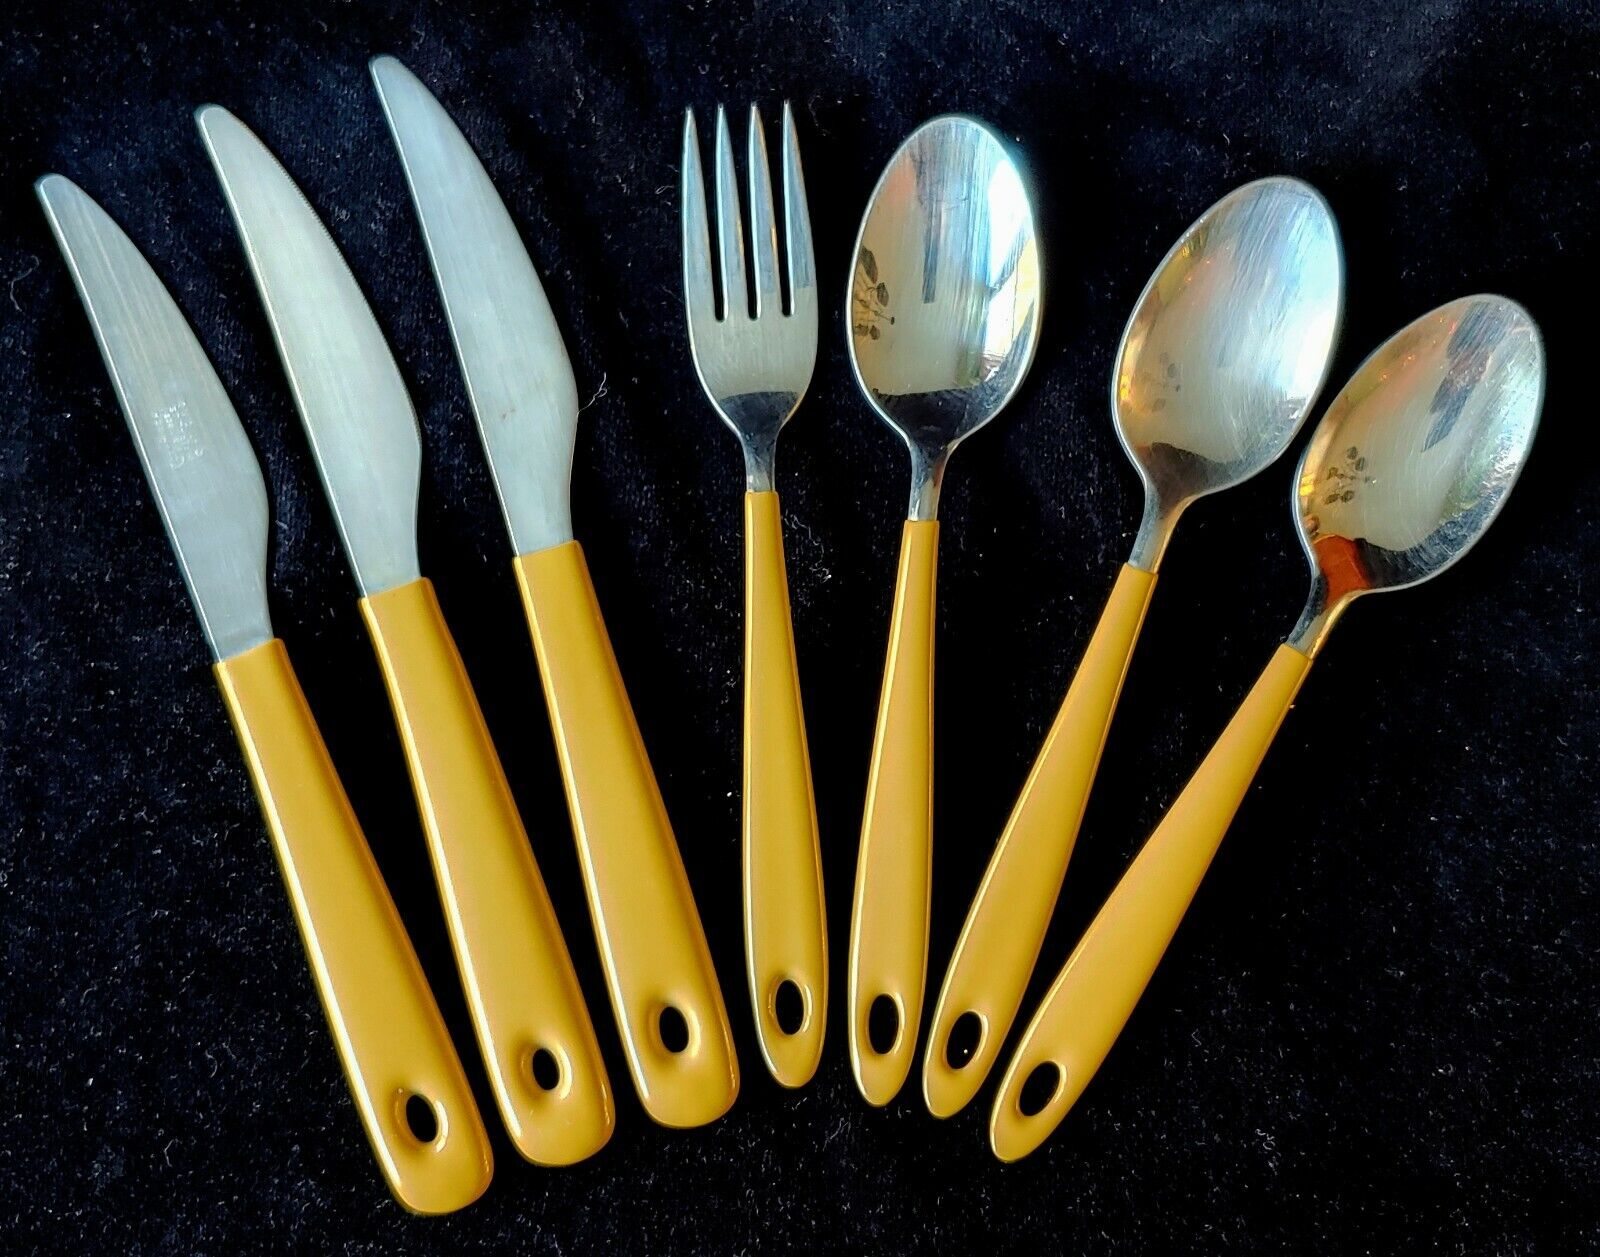 Vintage 1971 CORELLE "BUTTERFLY GOLD" Mustard Yellow Coated FLATWARE 7 Pcs. Без бренда